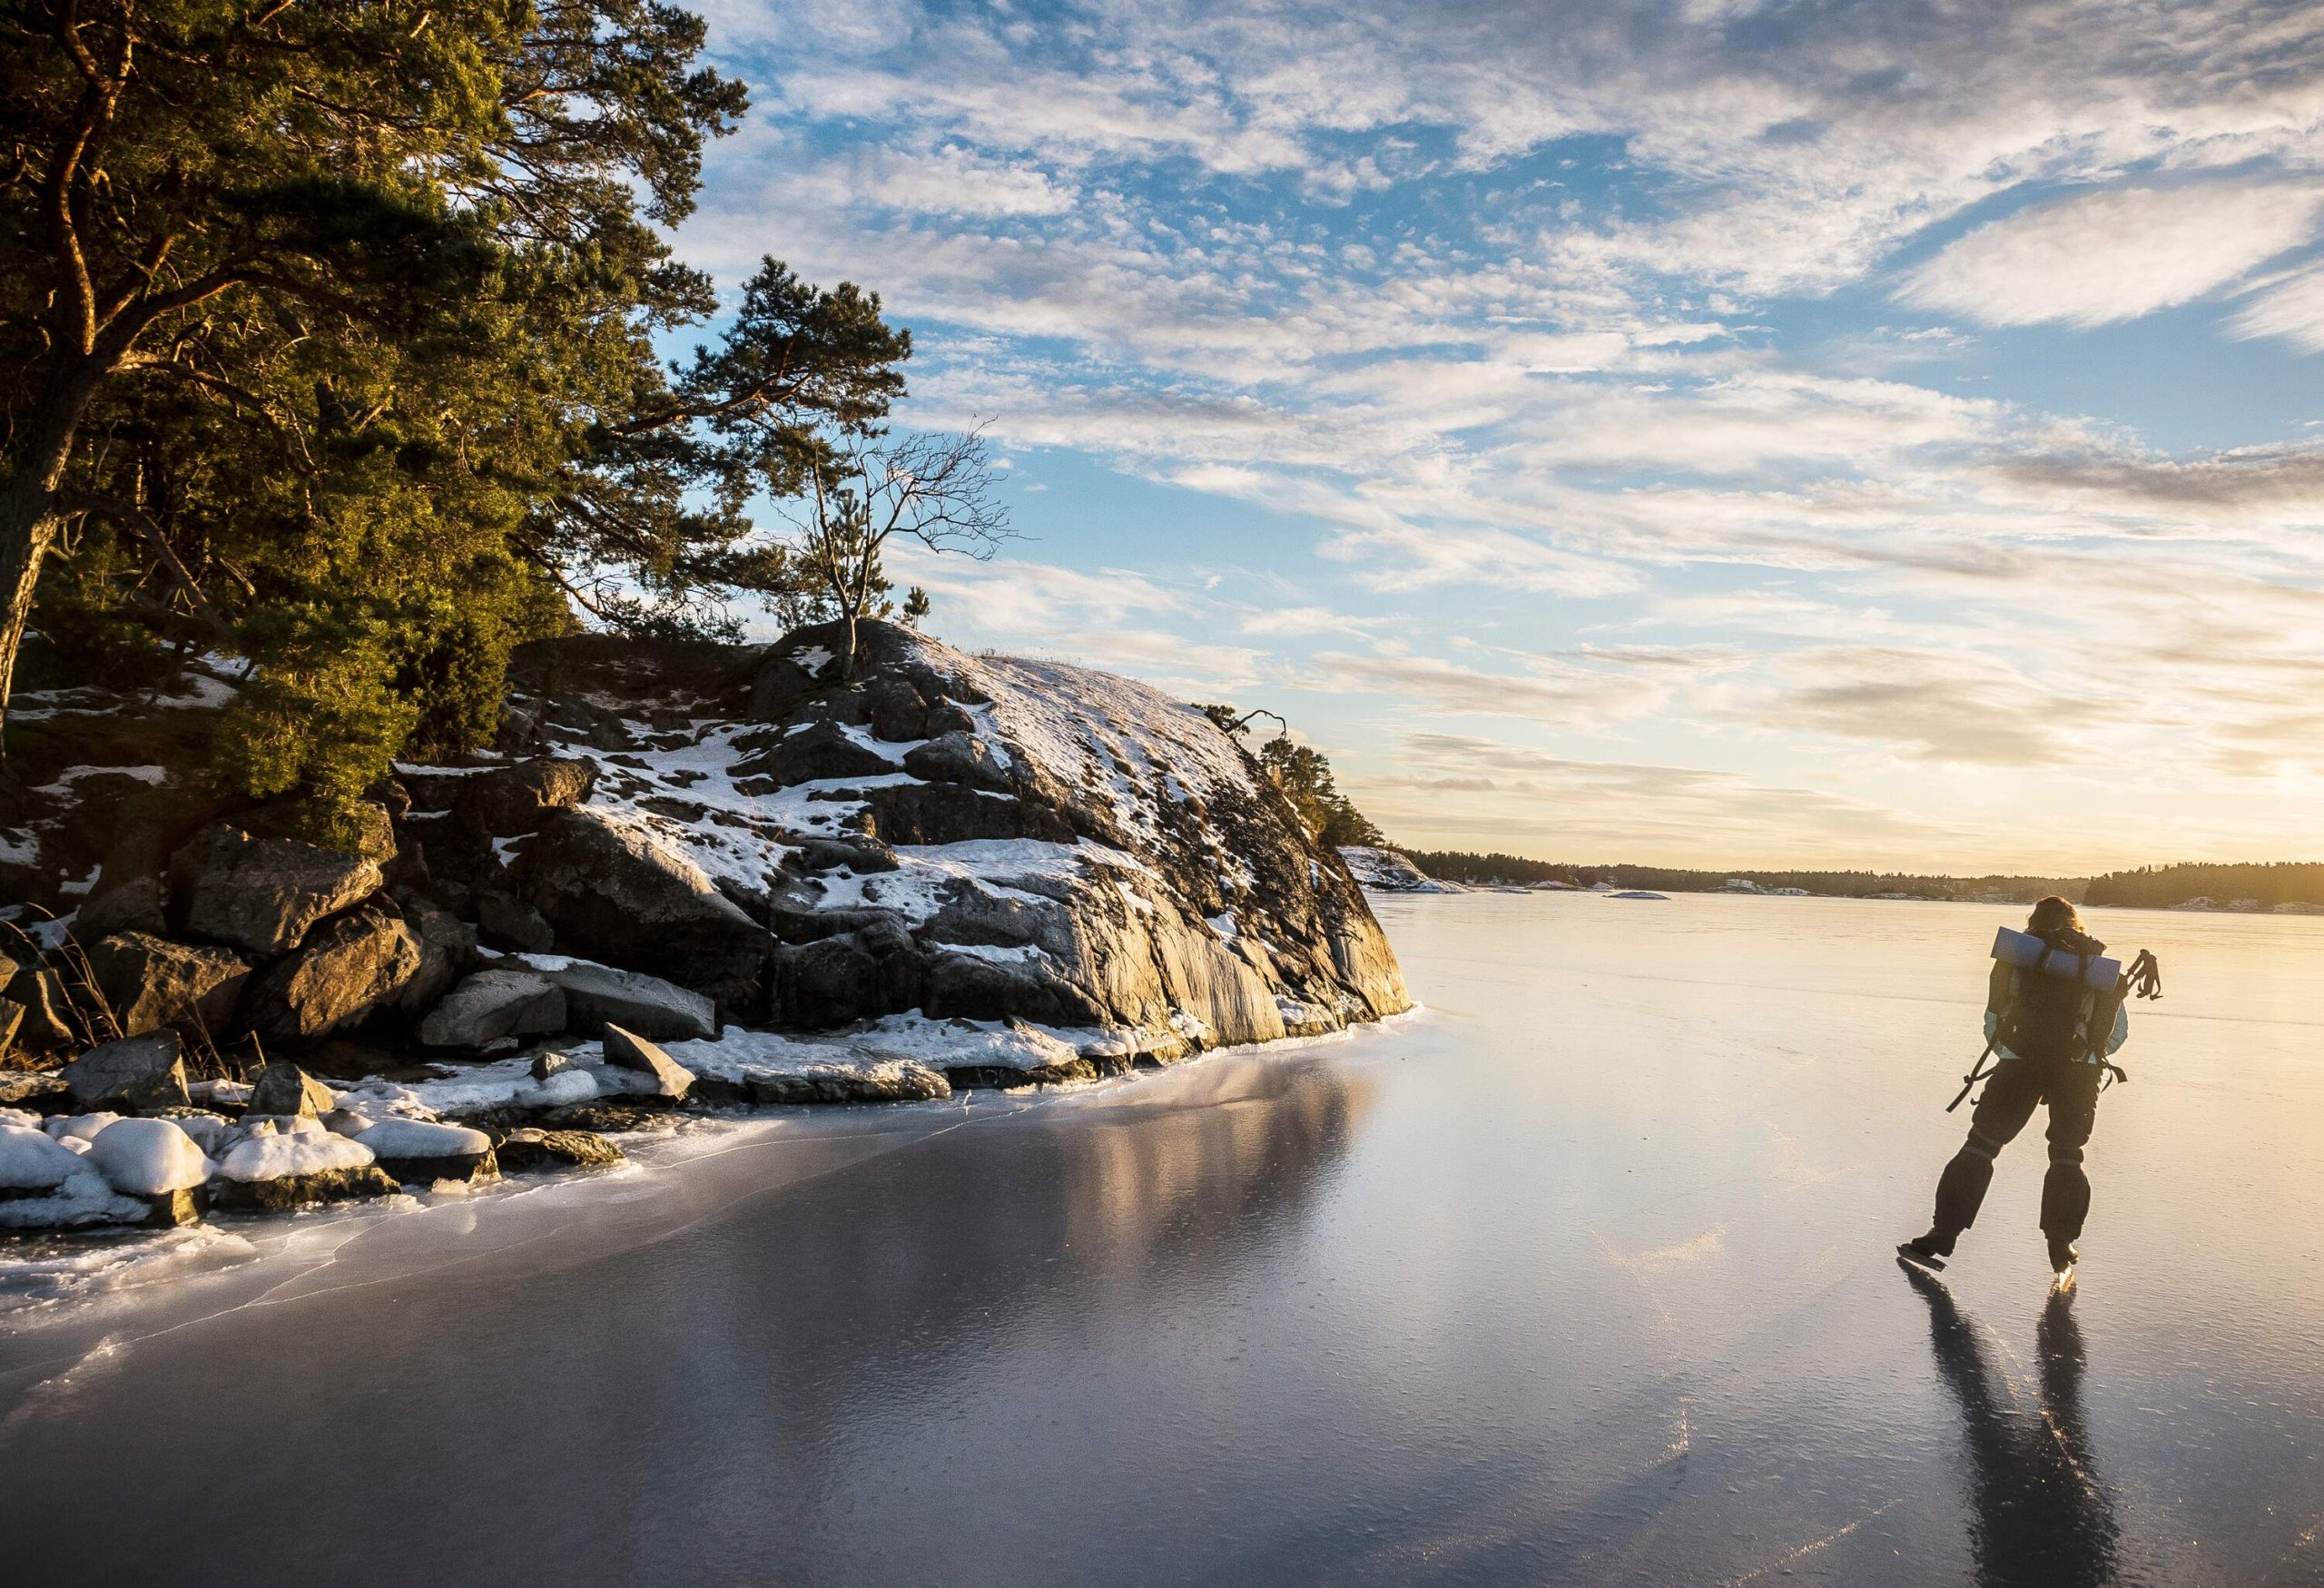 A person skates on a frozen lake beside the boulders and trees while carrying a camping gear.